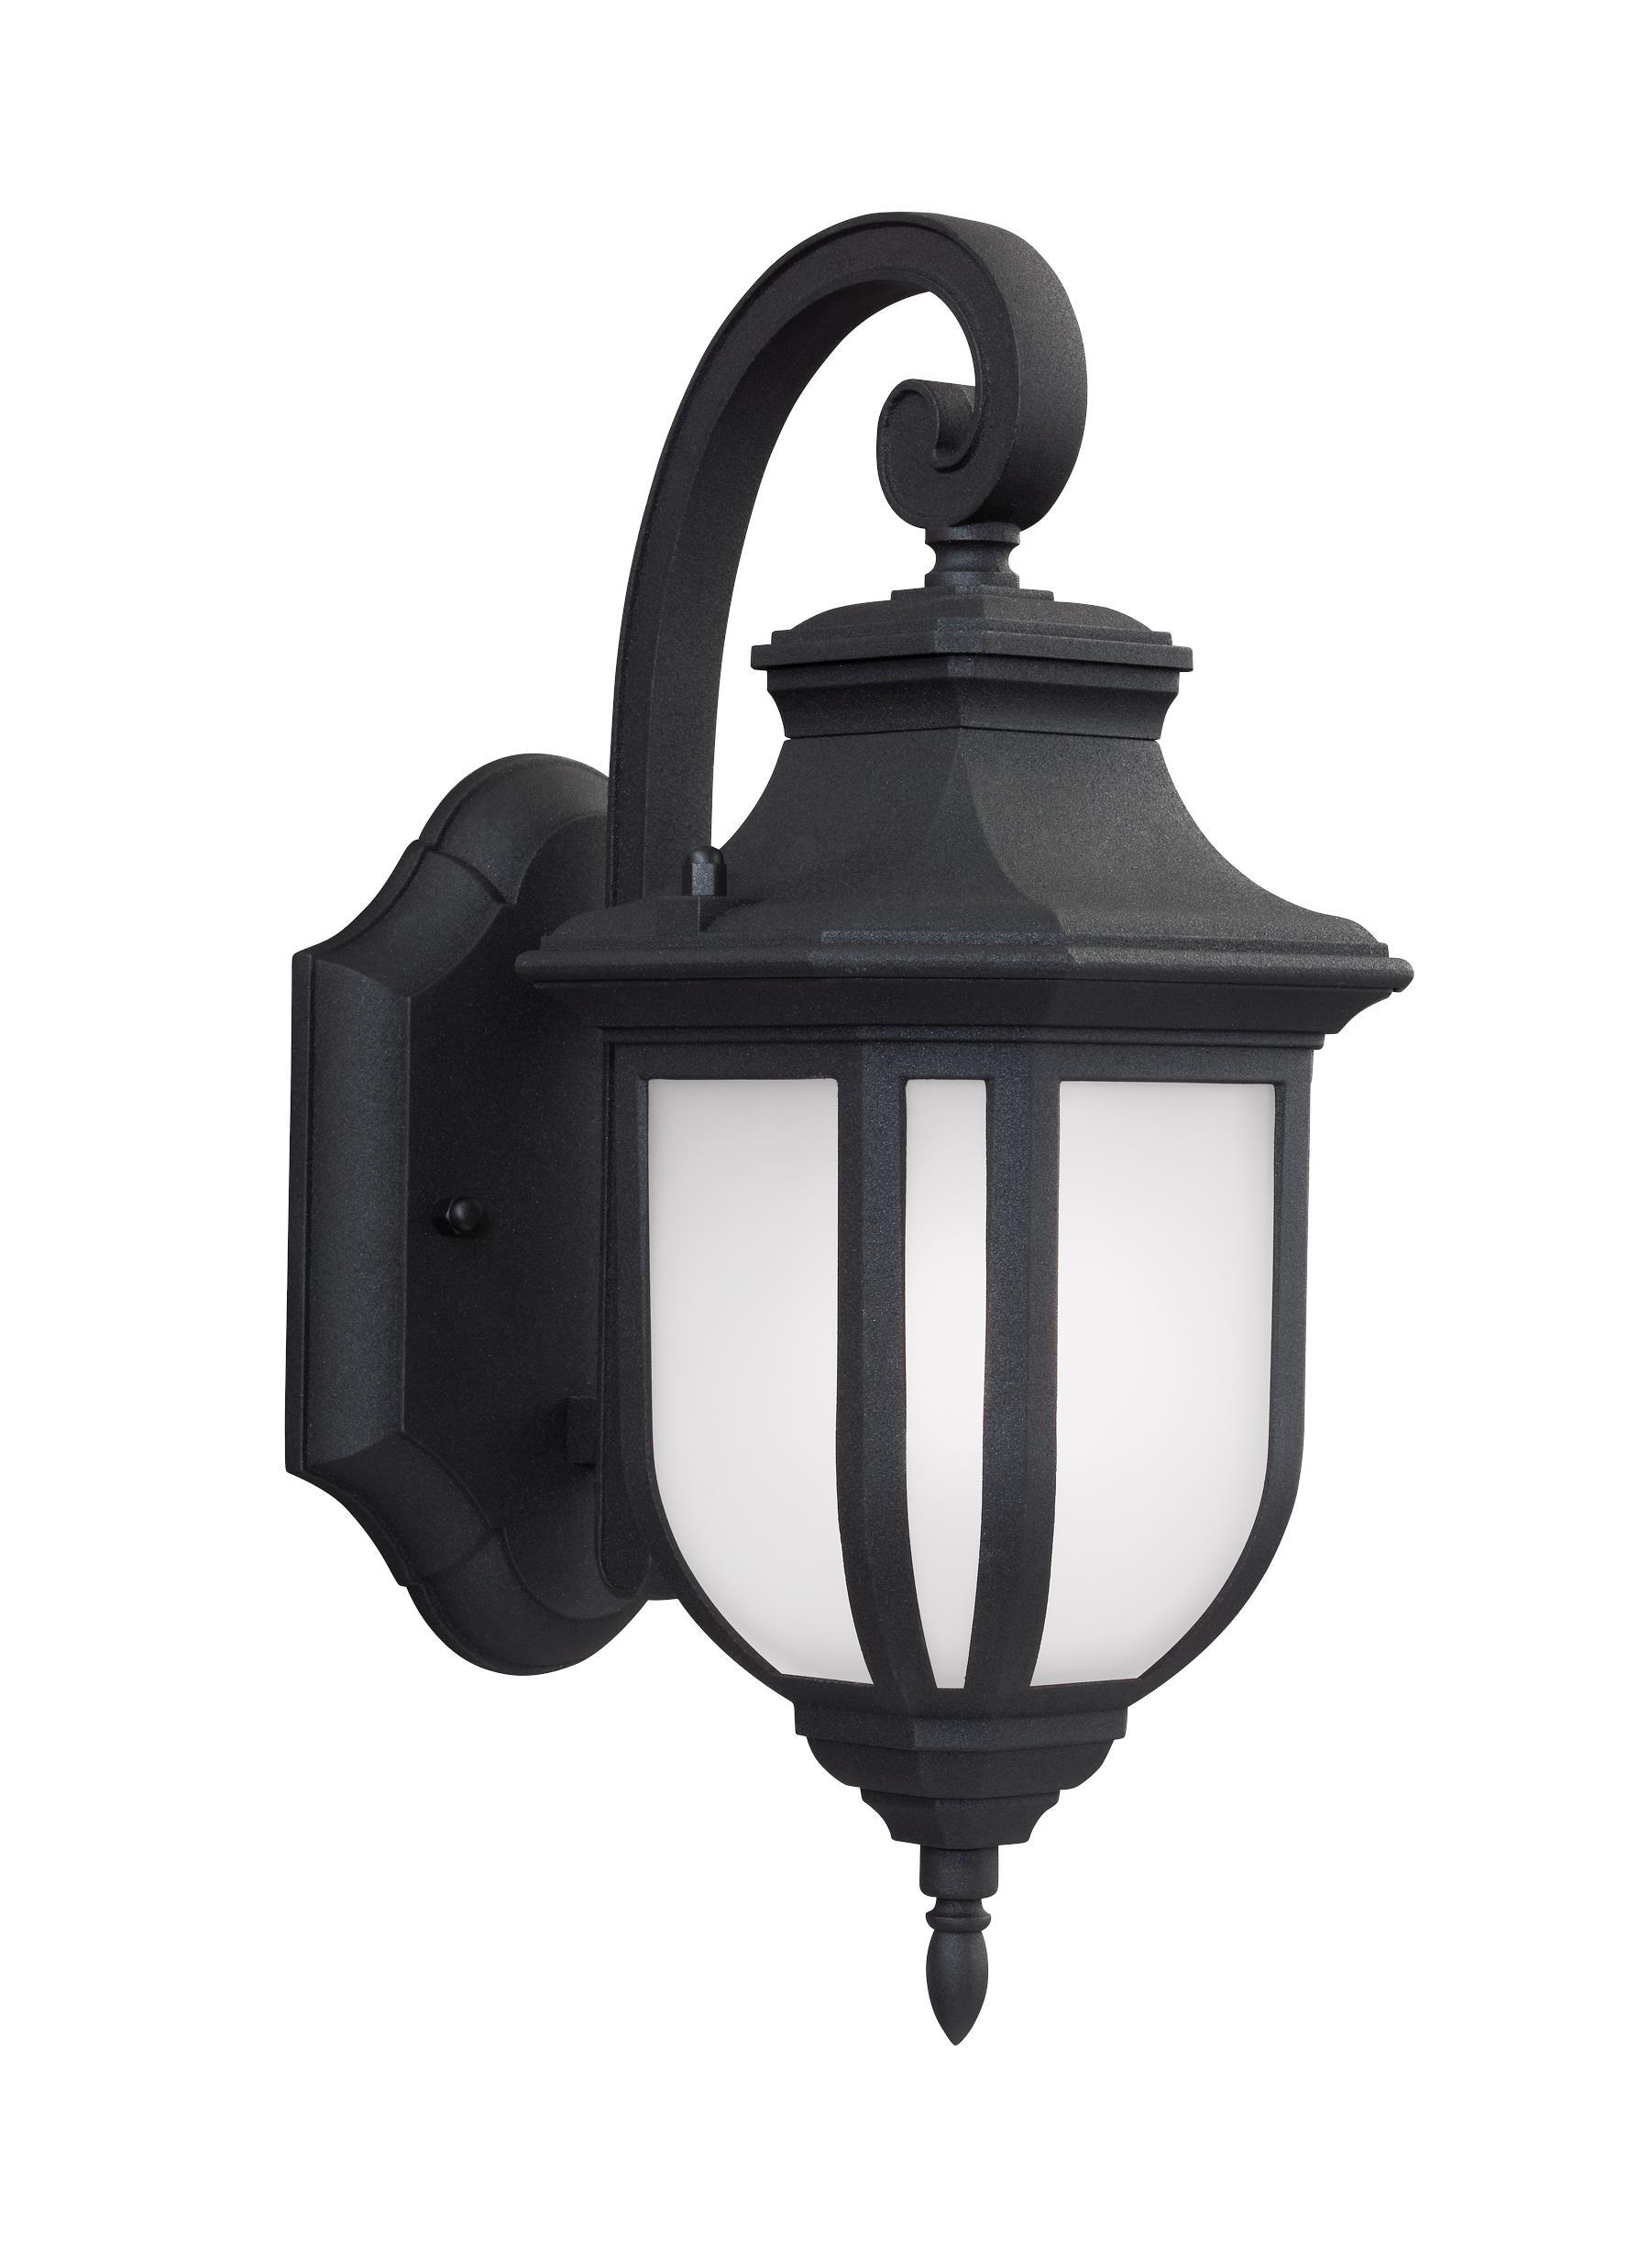 Childress Small One Light Outdoor LED Wall Lantern - Black Outdoor Sea Gull Lighting 